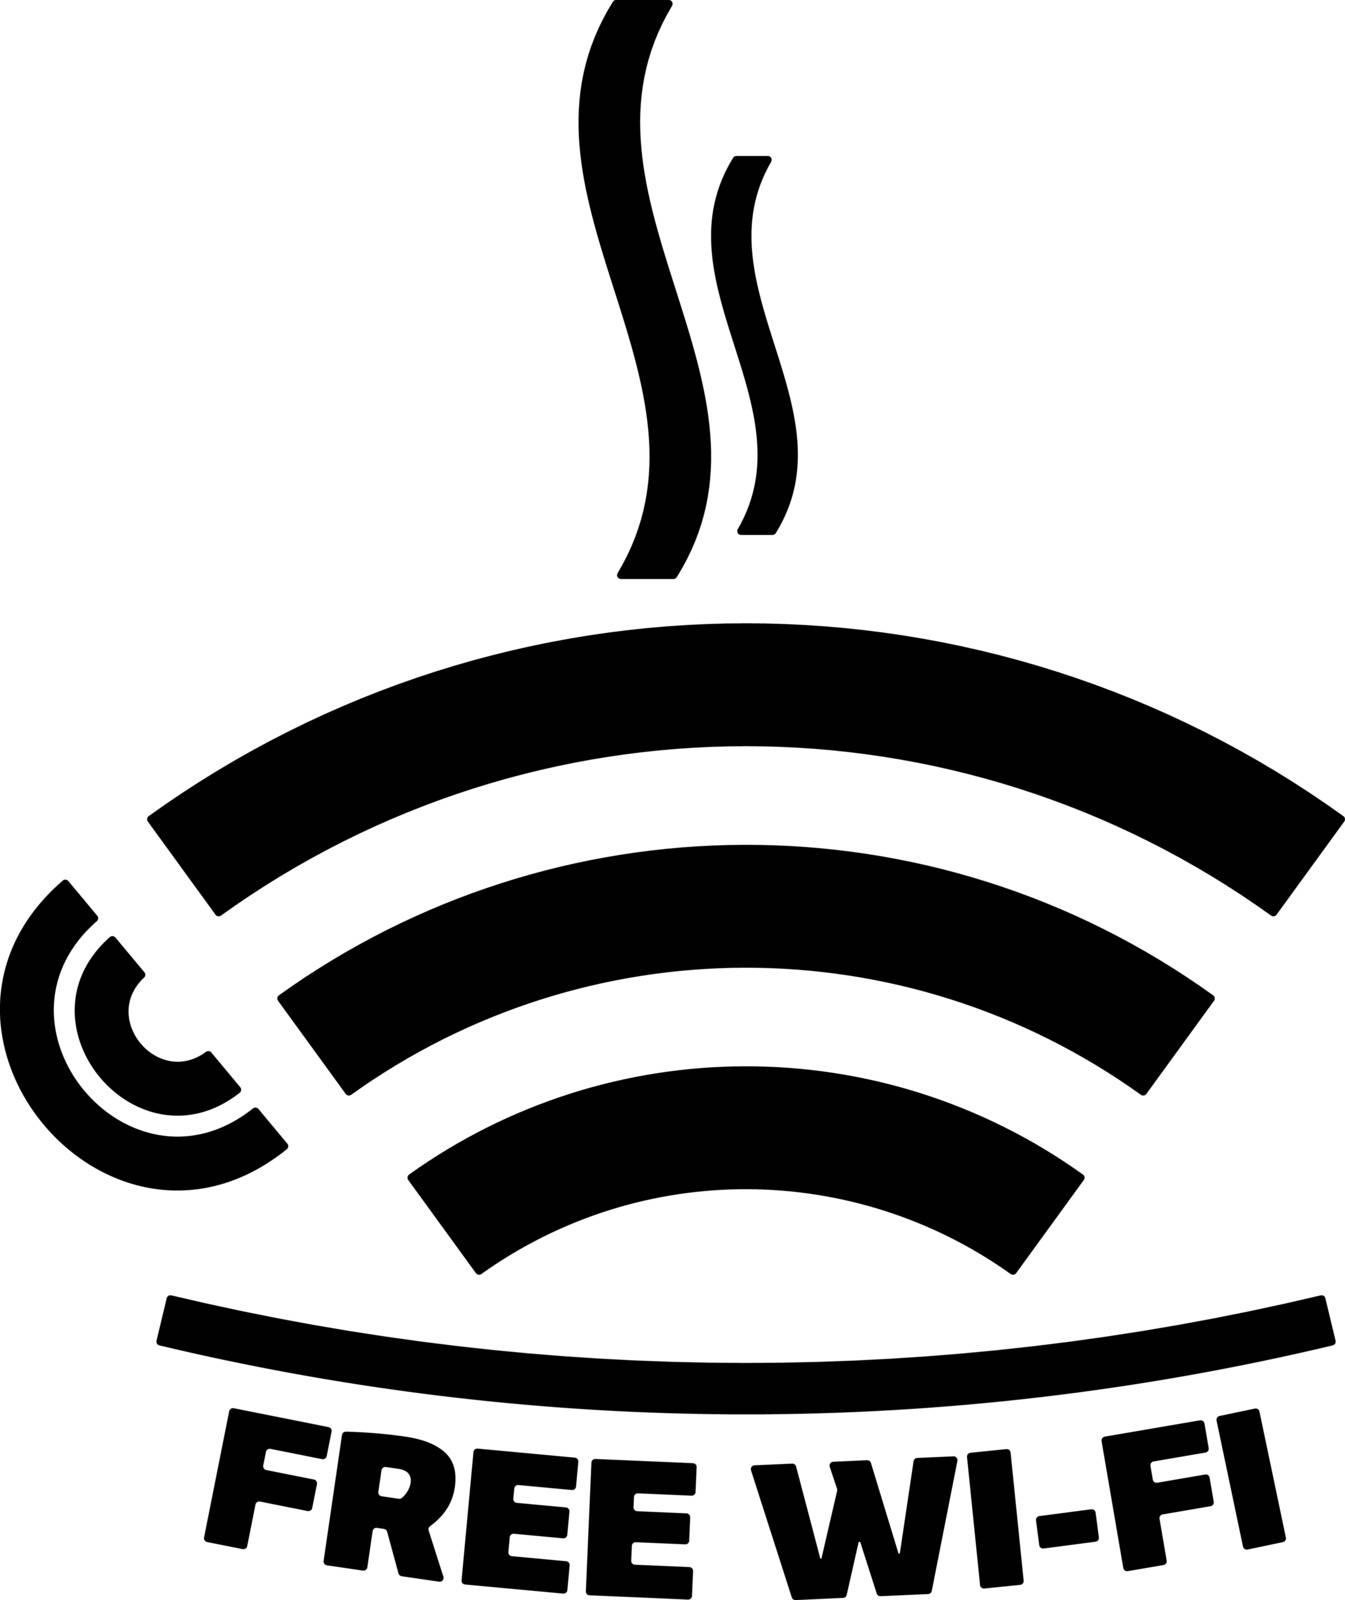 Free wi-fi cafe icon by clusterx